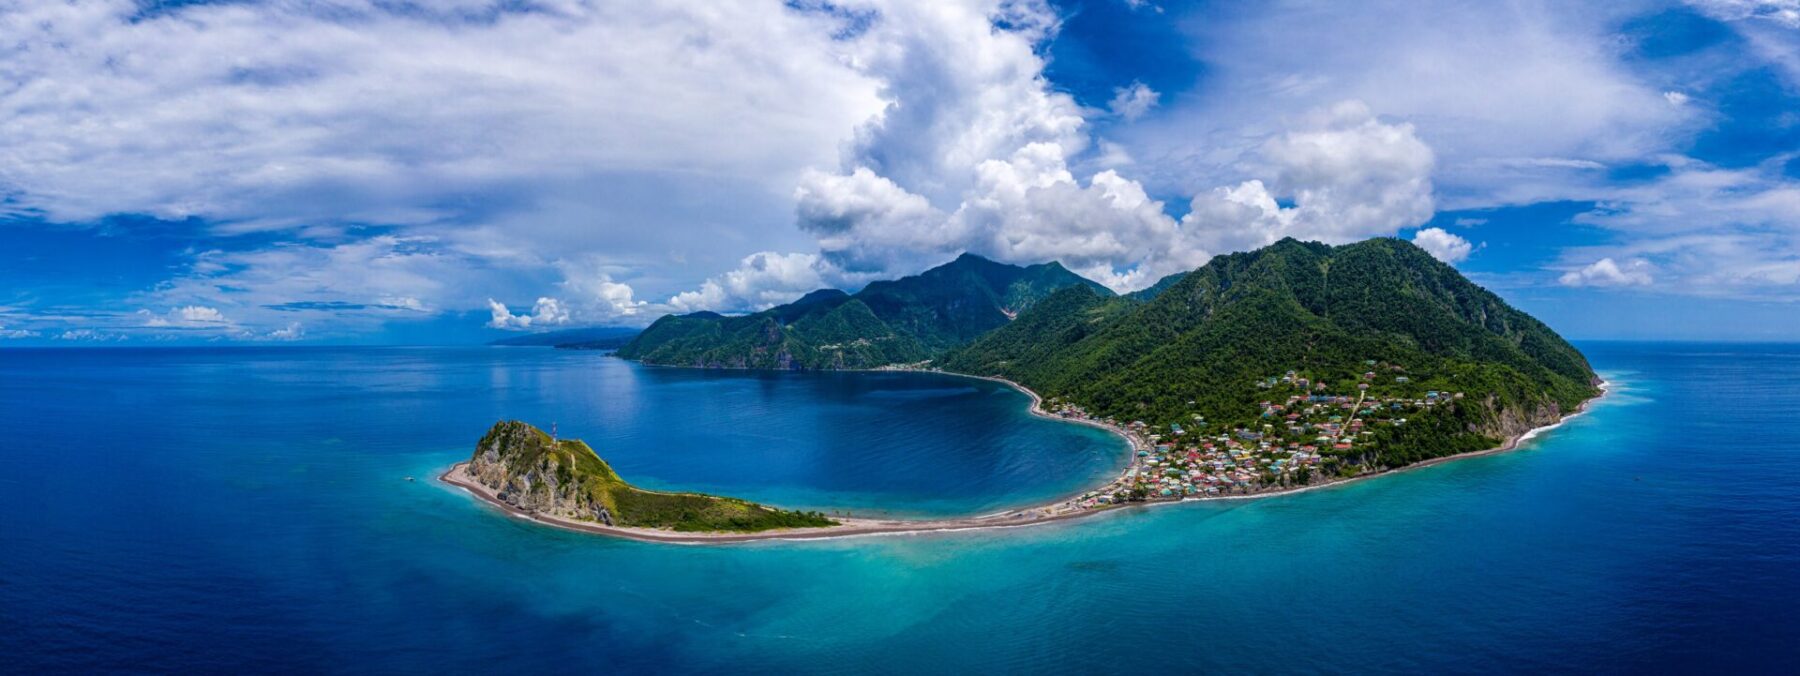 Dominica New Deals and Non Stop Flights The Nature Island - Travel Dreams Magazine : Travel Magazine